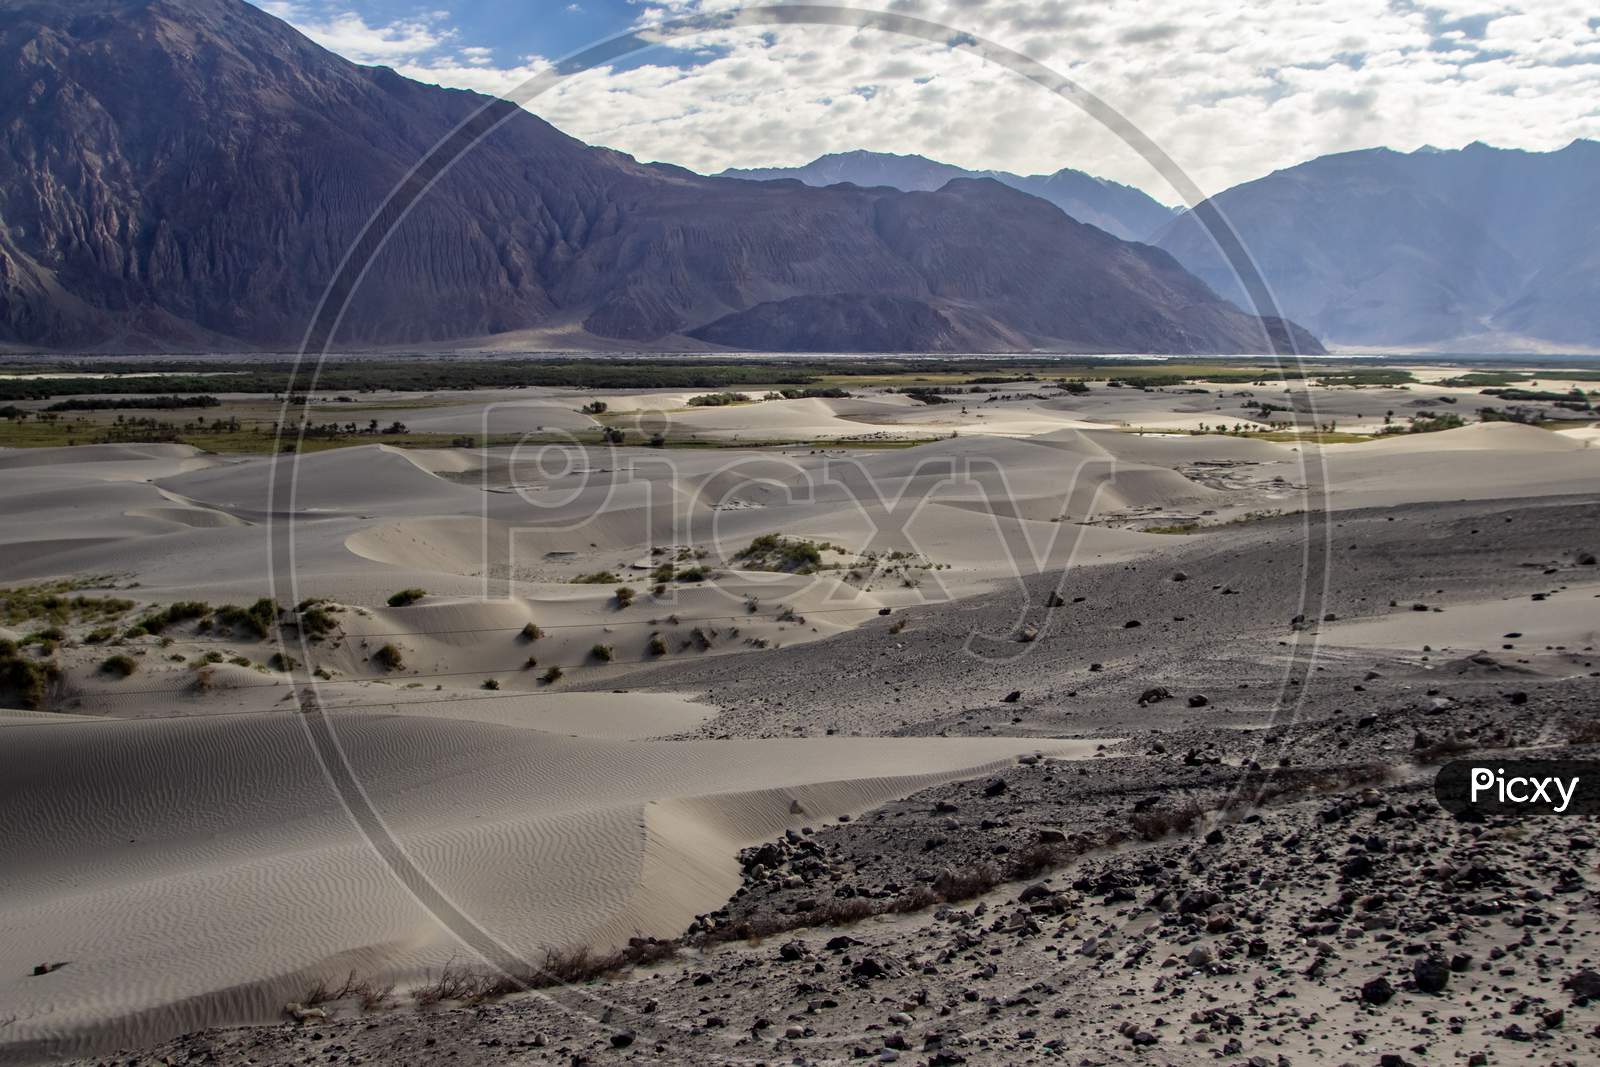 Arid Dry Dessert Sand Dunes Of Nubra Valley With Himalayan Barren Mountain Range In The Background At Ladakh, Kashmir, India